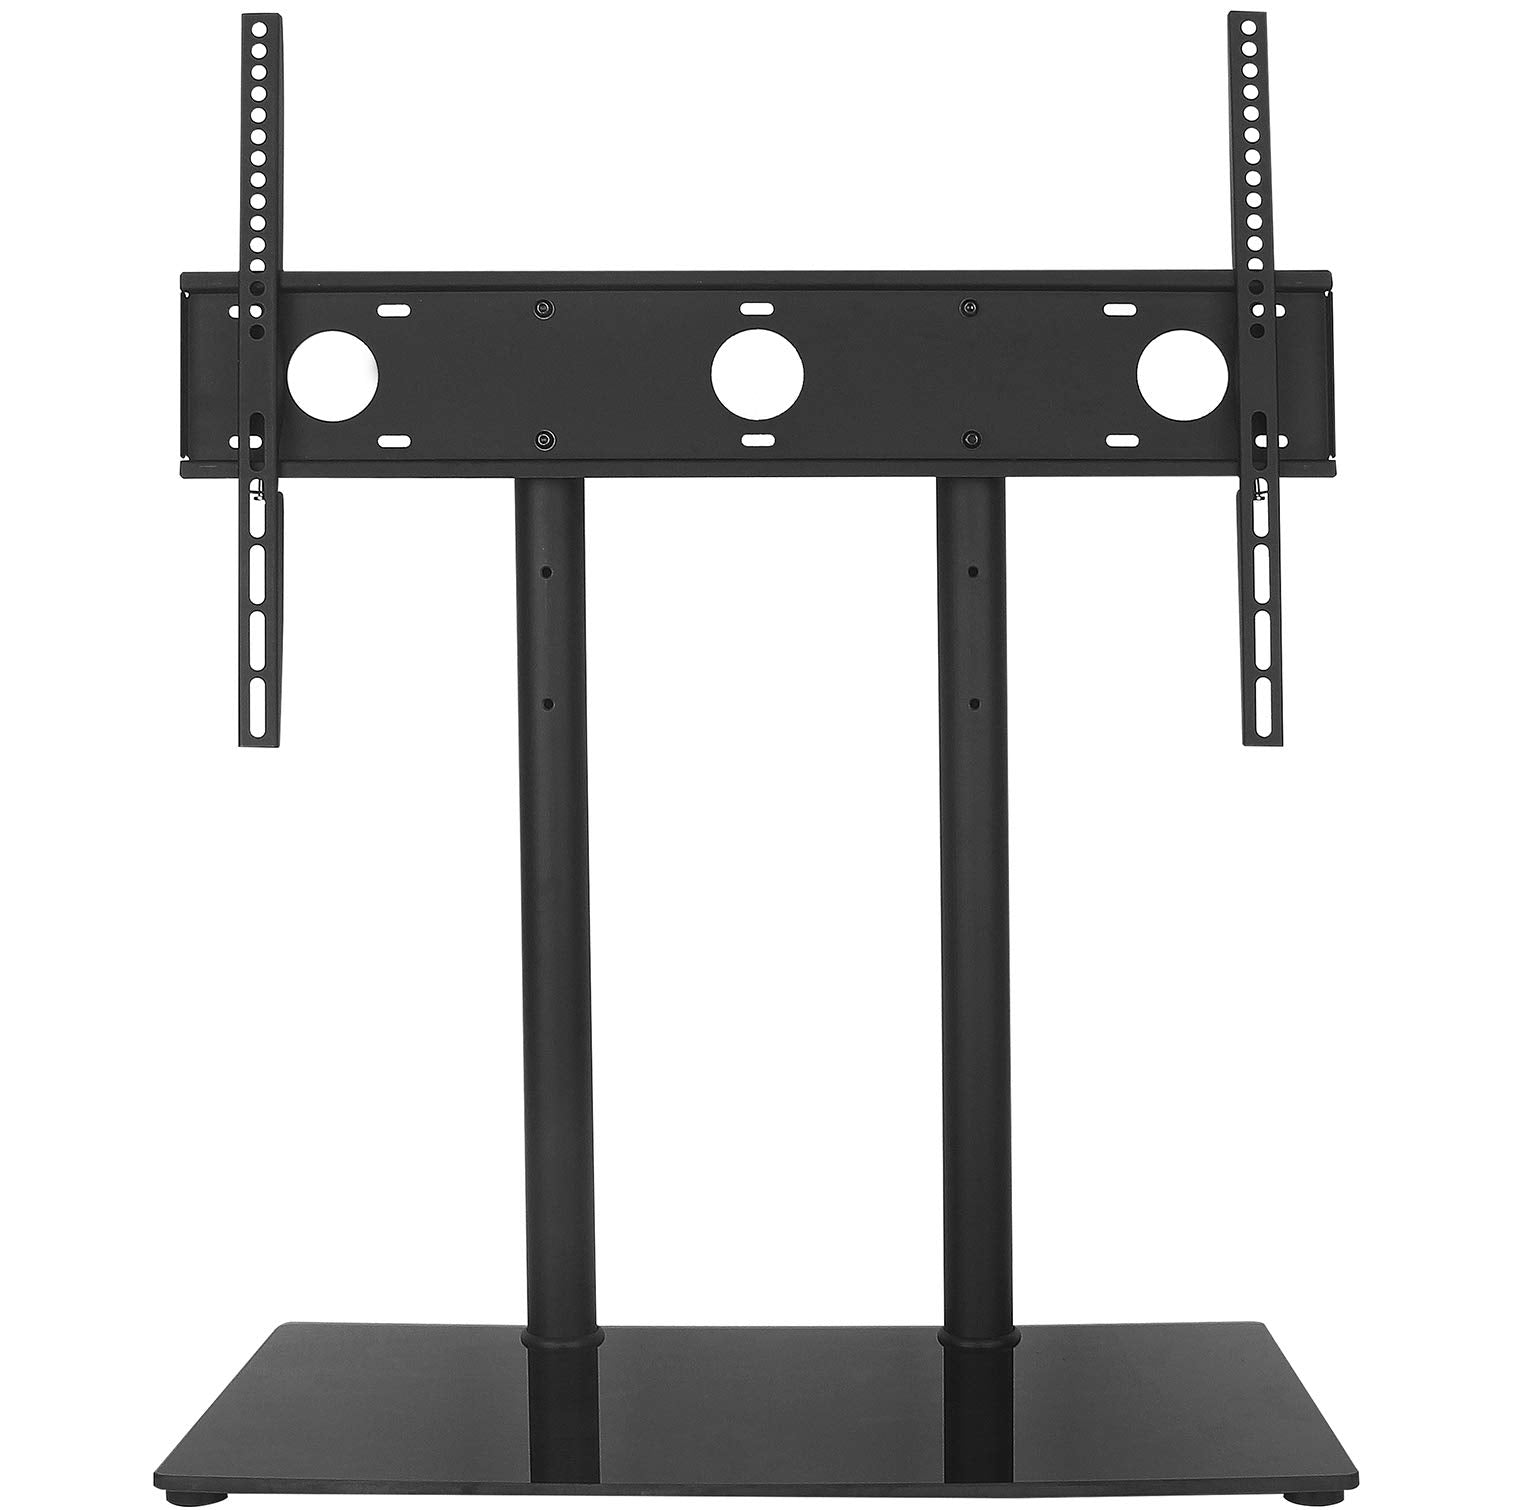 Adapter Plate for TV Mount, 200x200 Universal Mount ADP202 - WALI